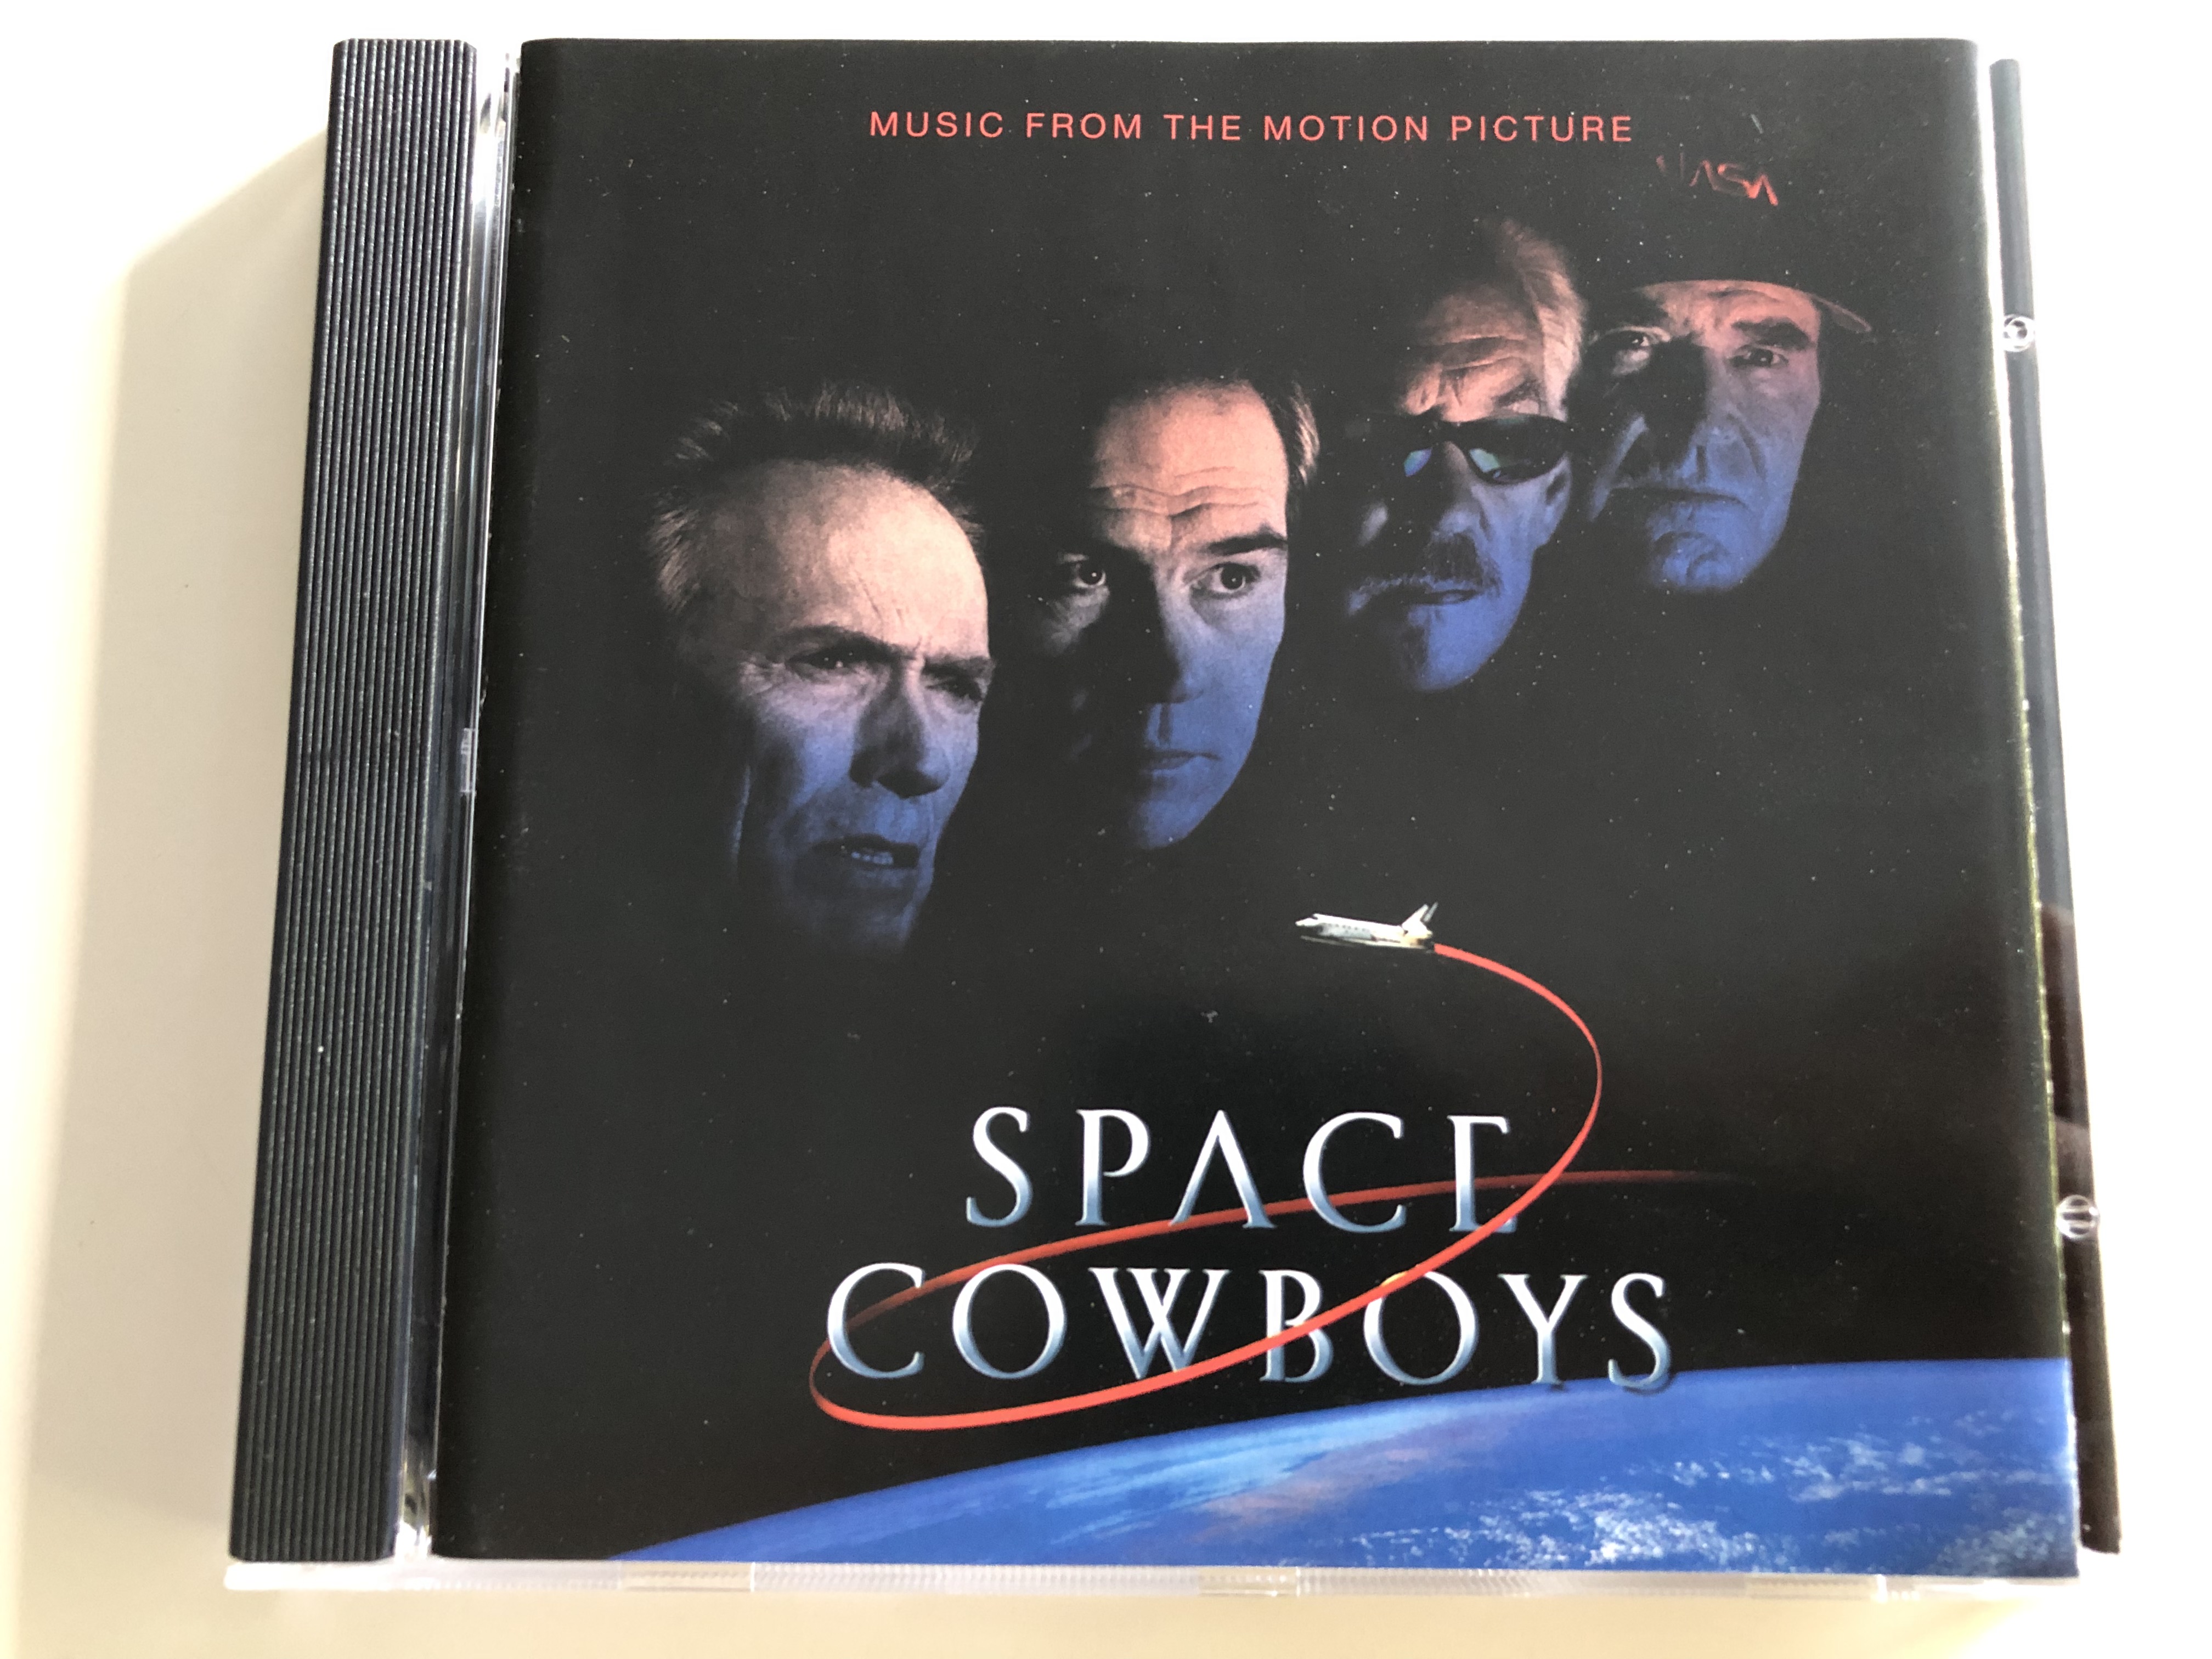 space-cowboys-music-from-the-motion-picture-original-soundtrack-audio-cd-2000-warner-bros-records-we-833-1-.jpg